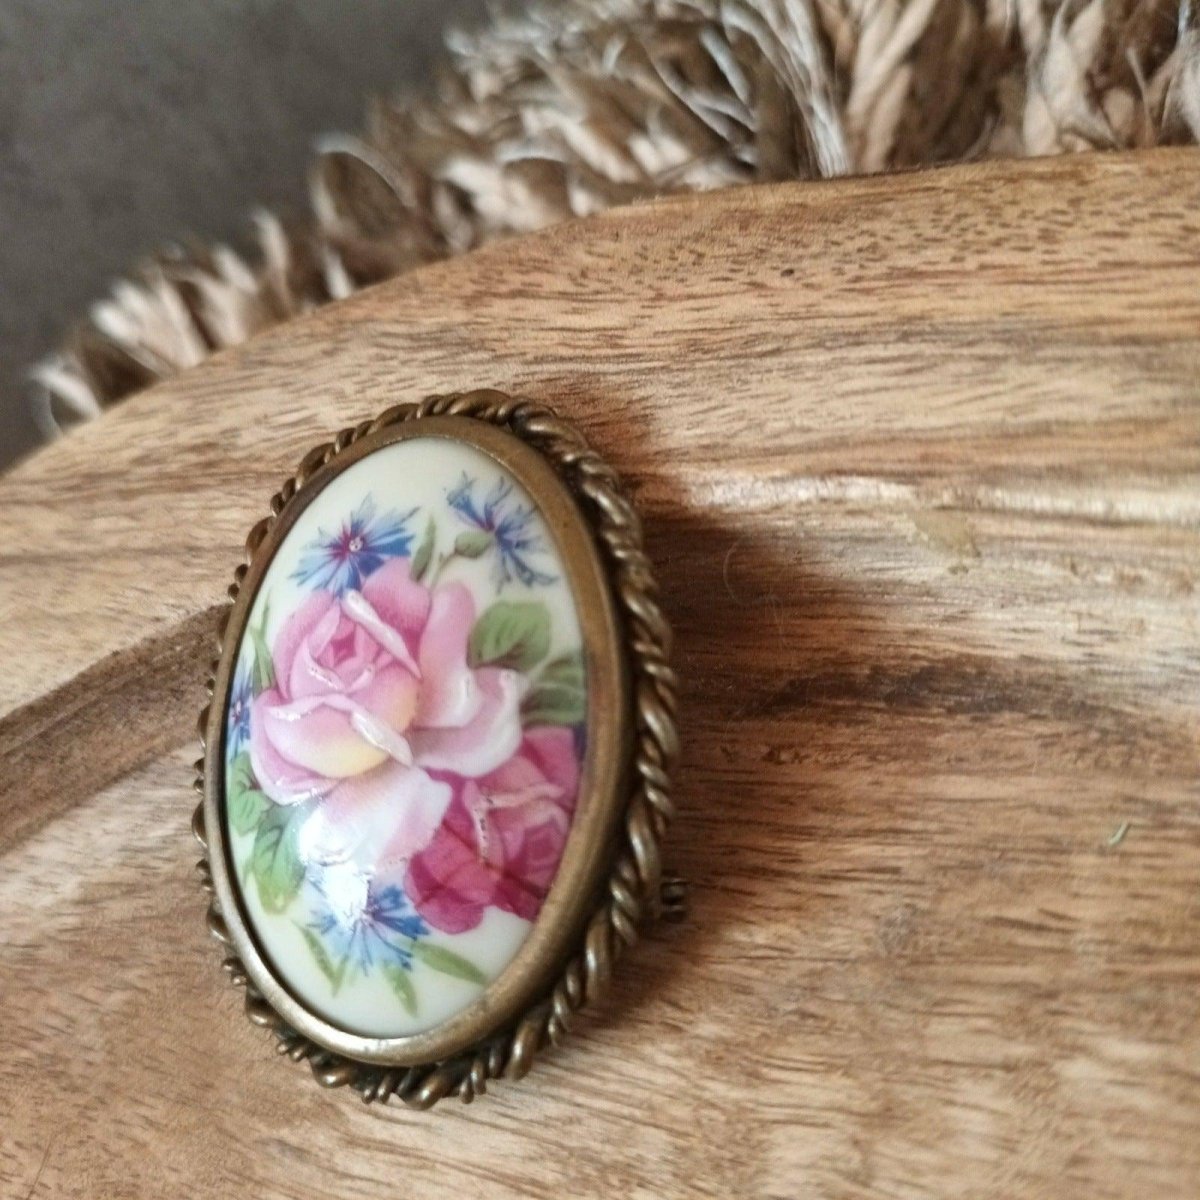 Vintage broche - Limoges France - Veilingcoach.be